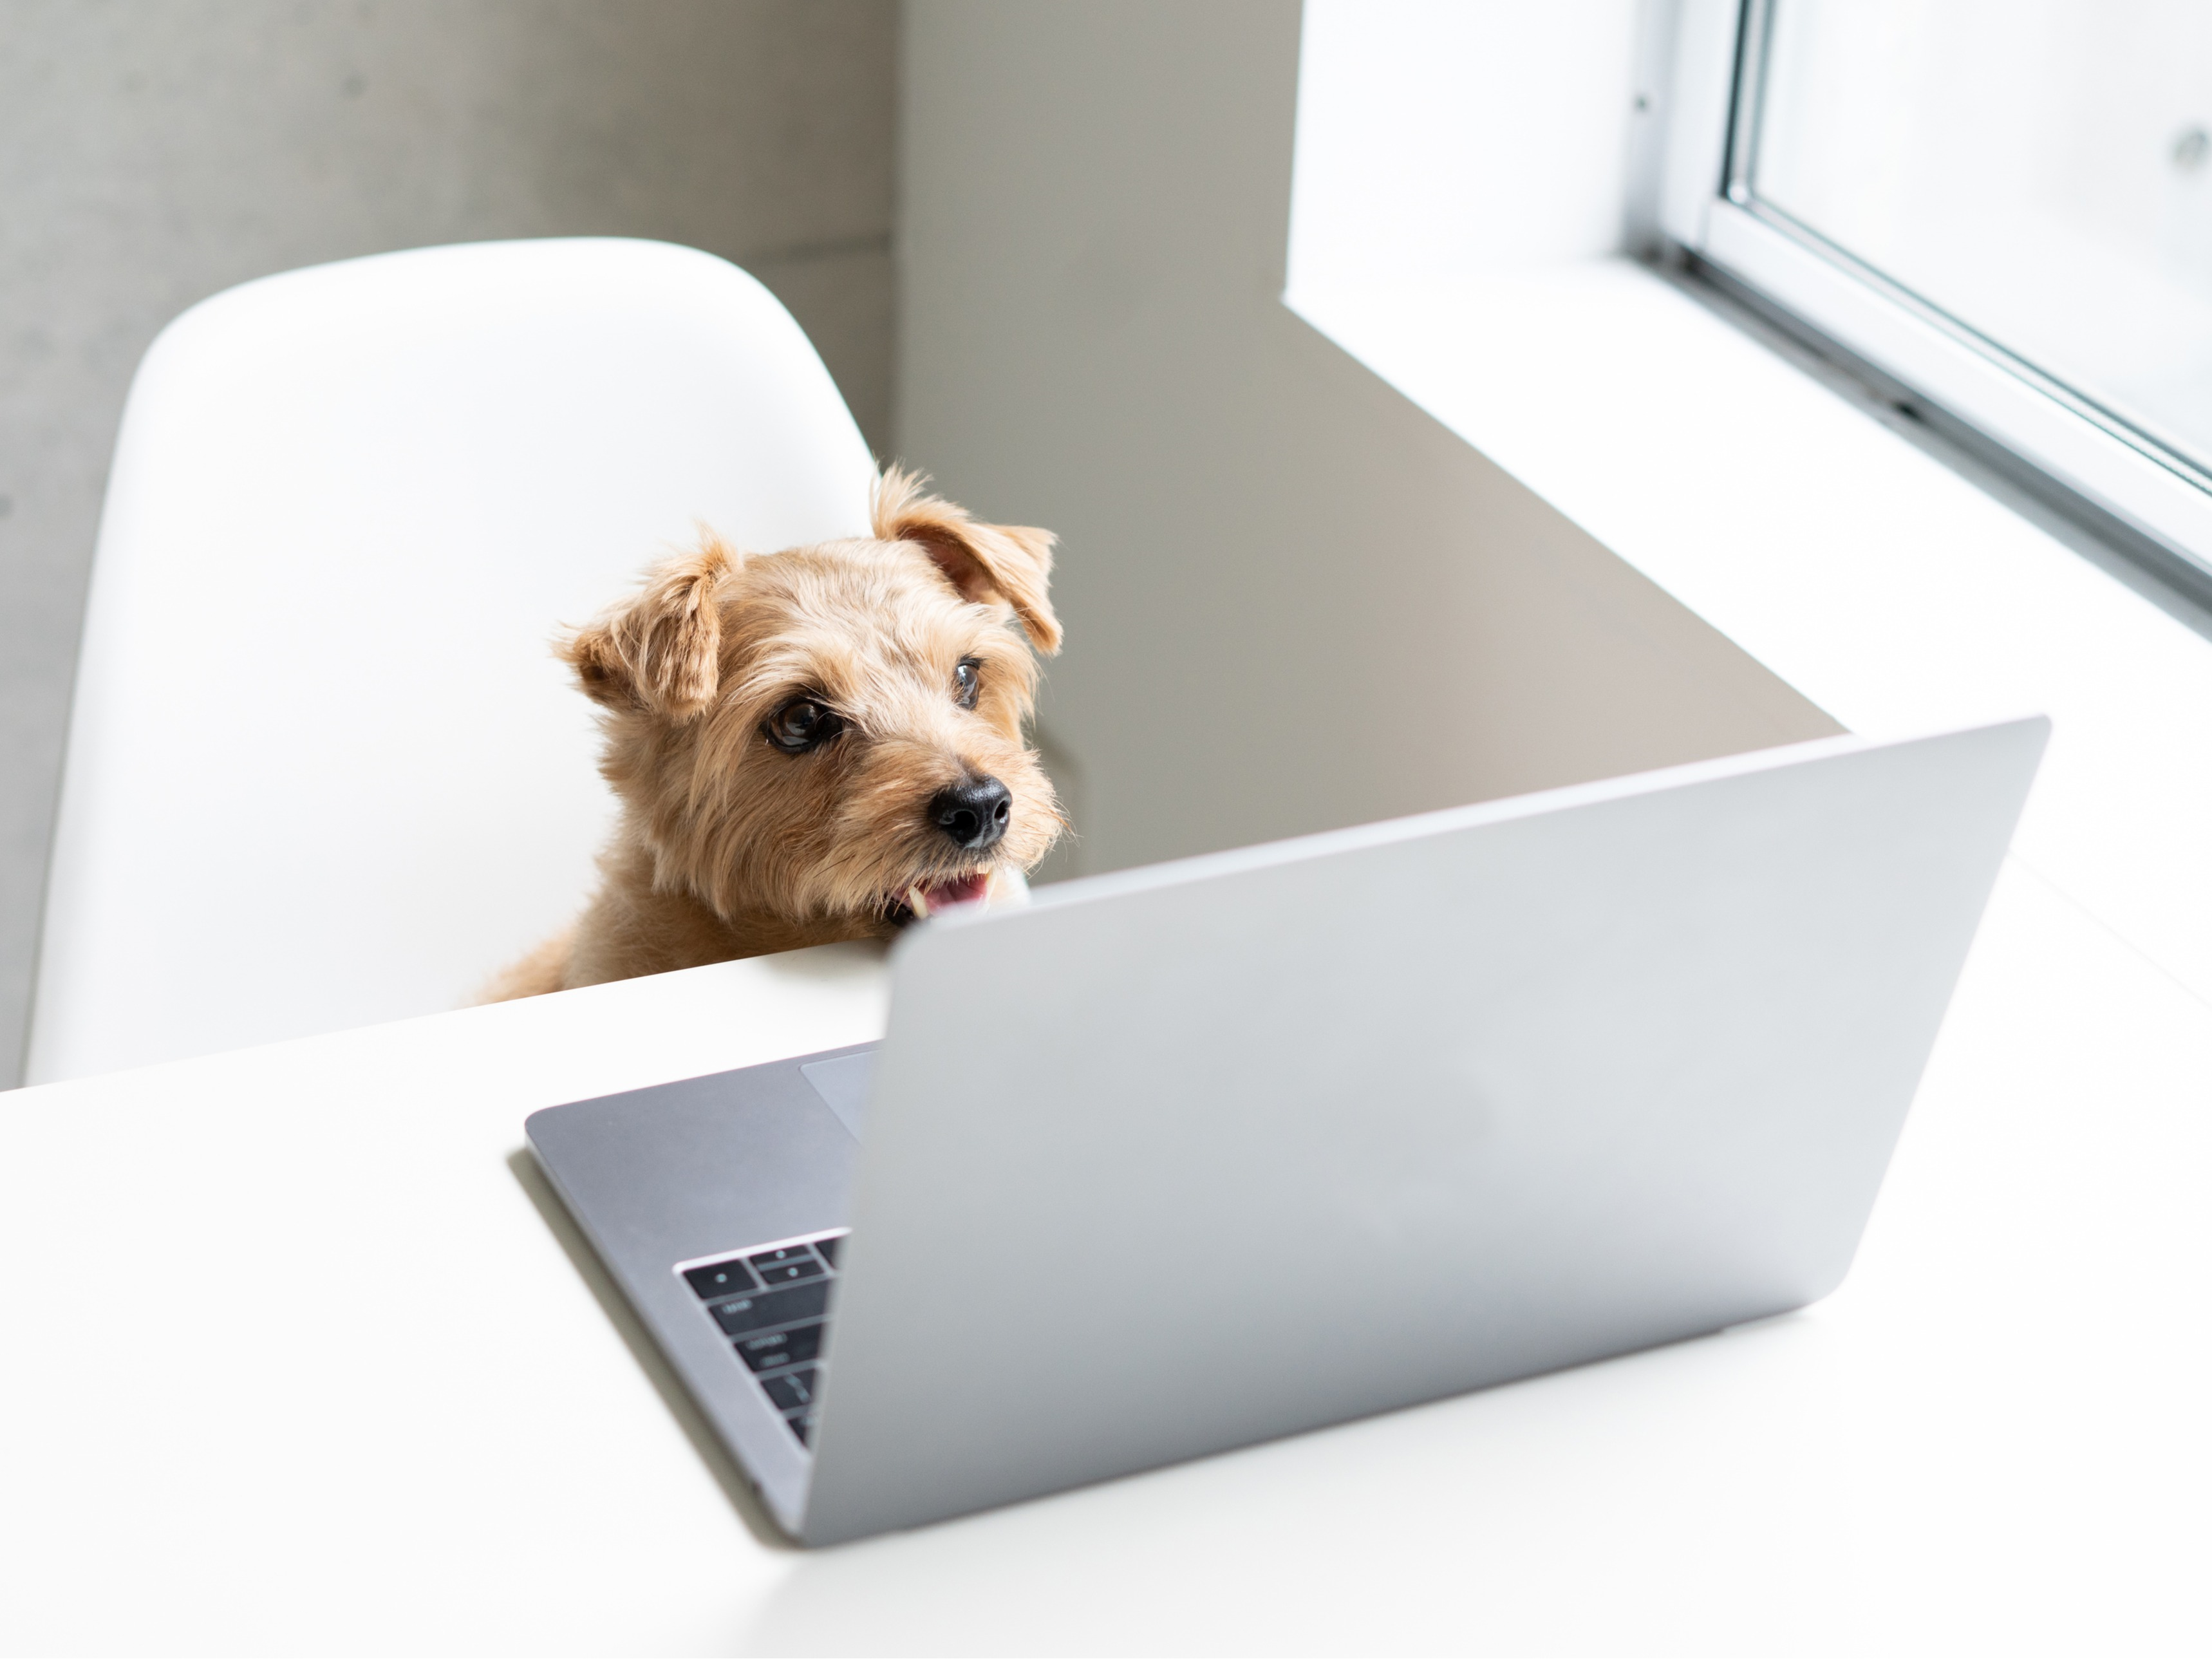 Should You Let Your Employees Take Their Pets to Work?